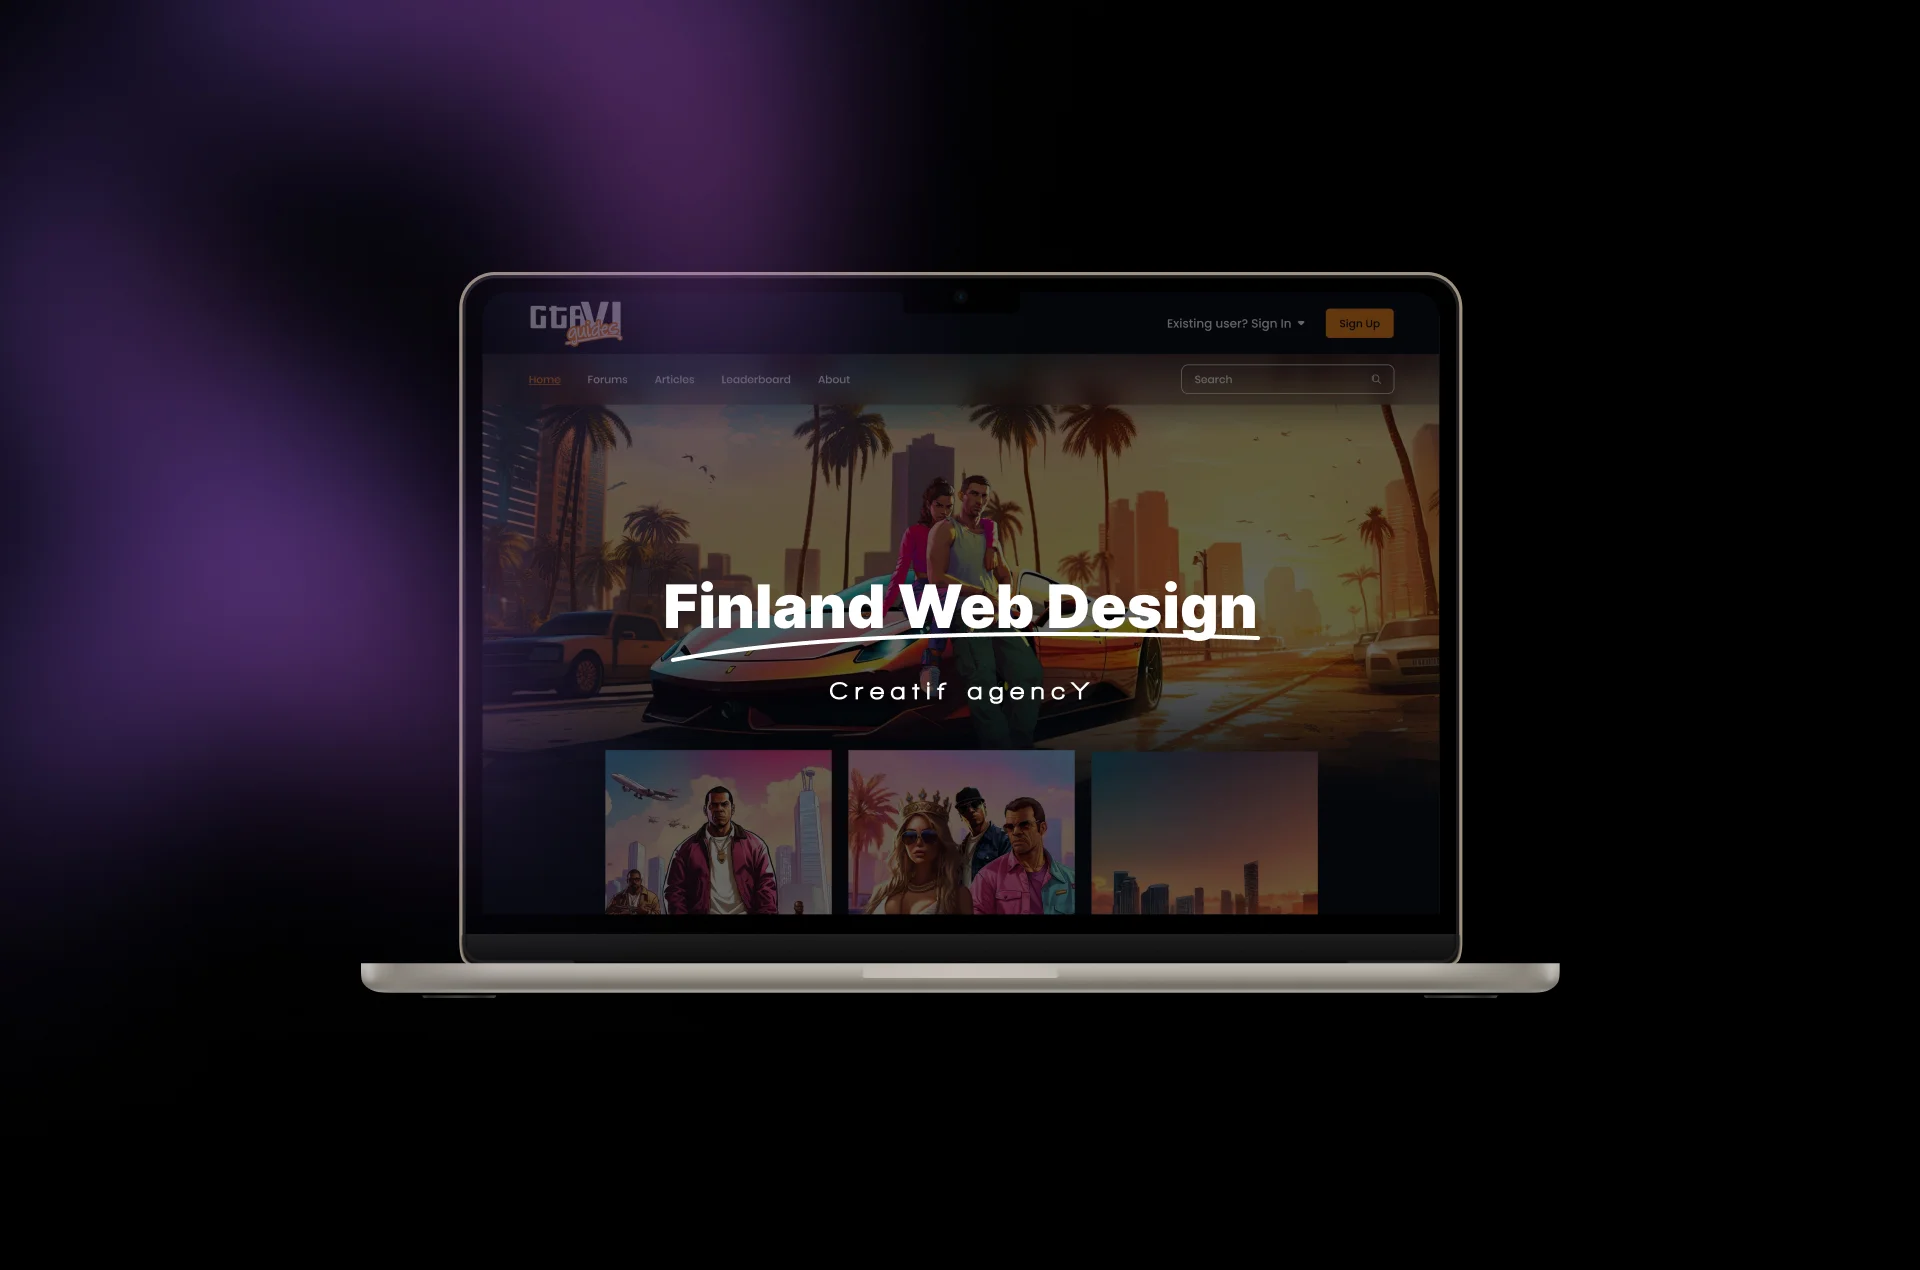 The best cities for Web Design in Finland